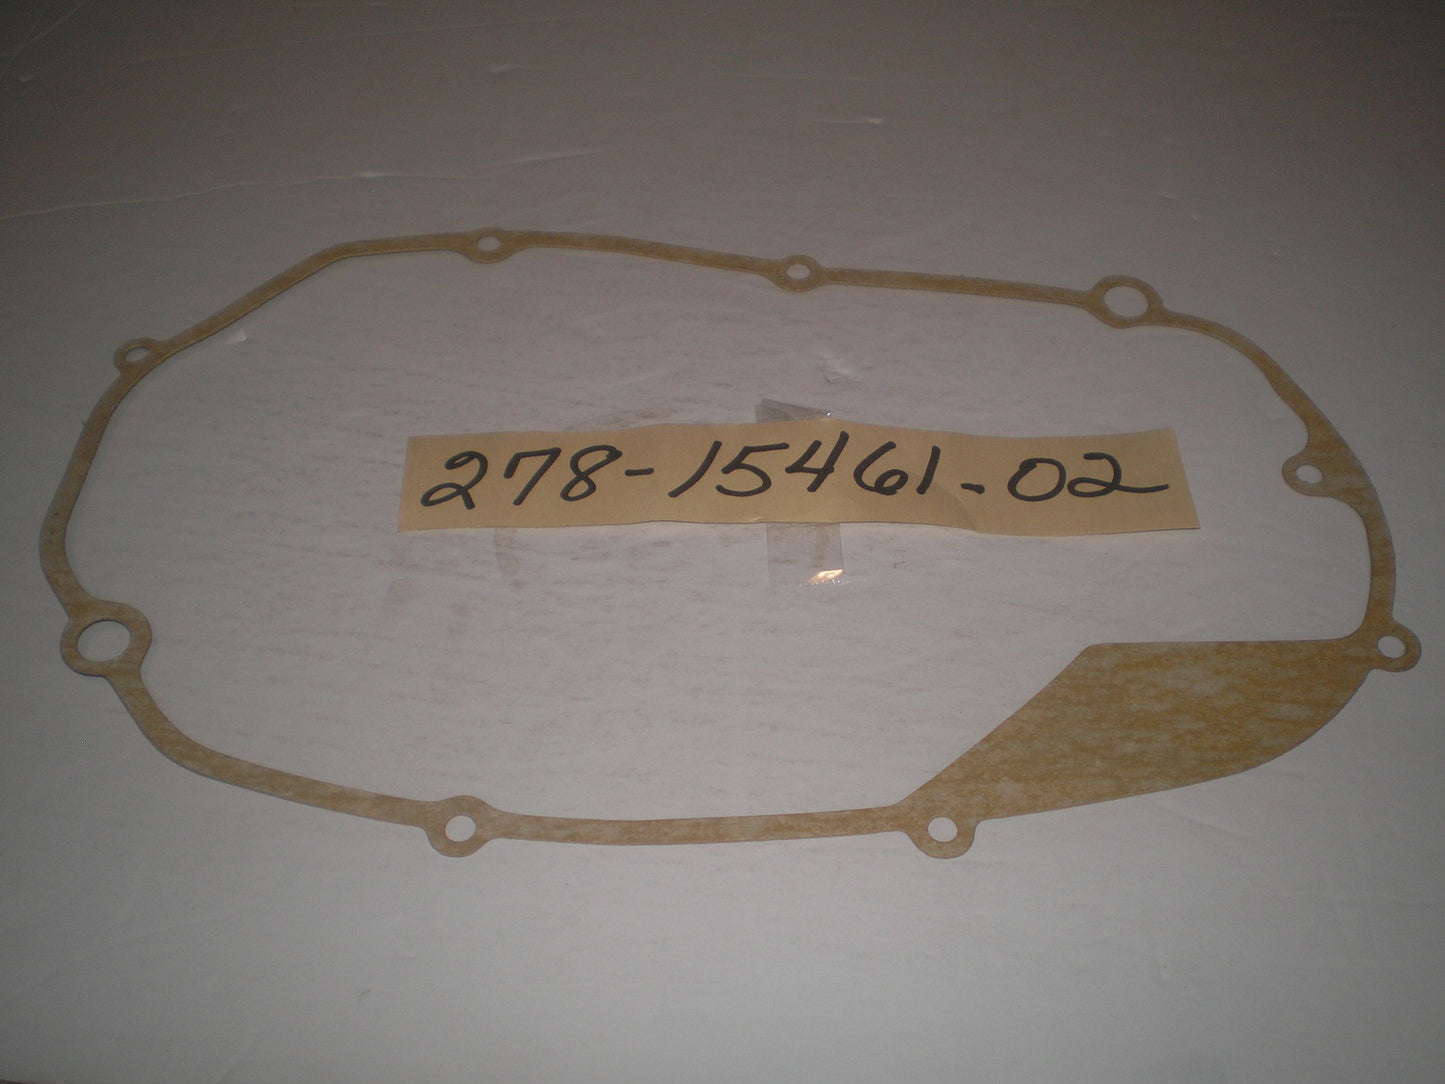 YAMAHA DS7 R5 RD250 RD350 TD3 TR3 TZ250 TZ350  Clutch Cover Gasket  278-15461-00 / 278-15461-02 / 278-15461-12